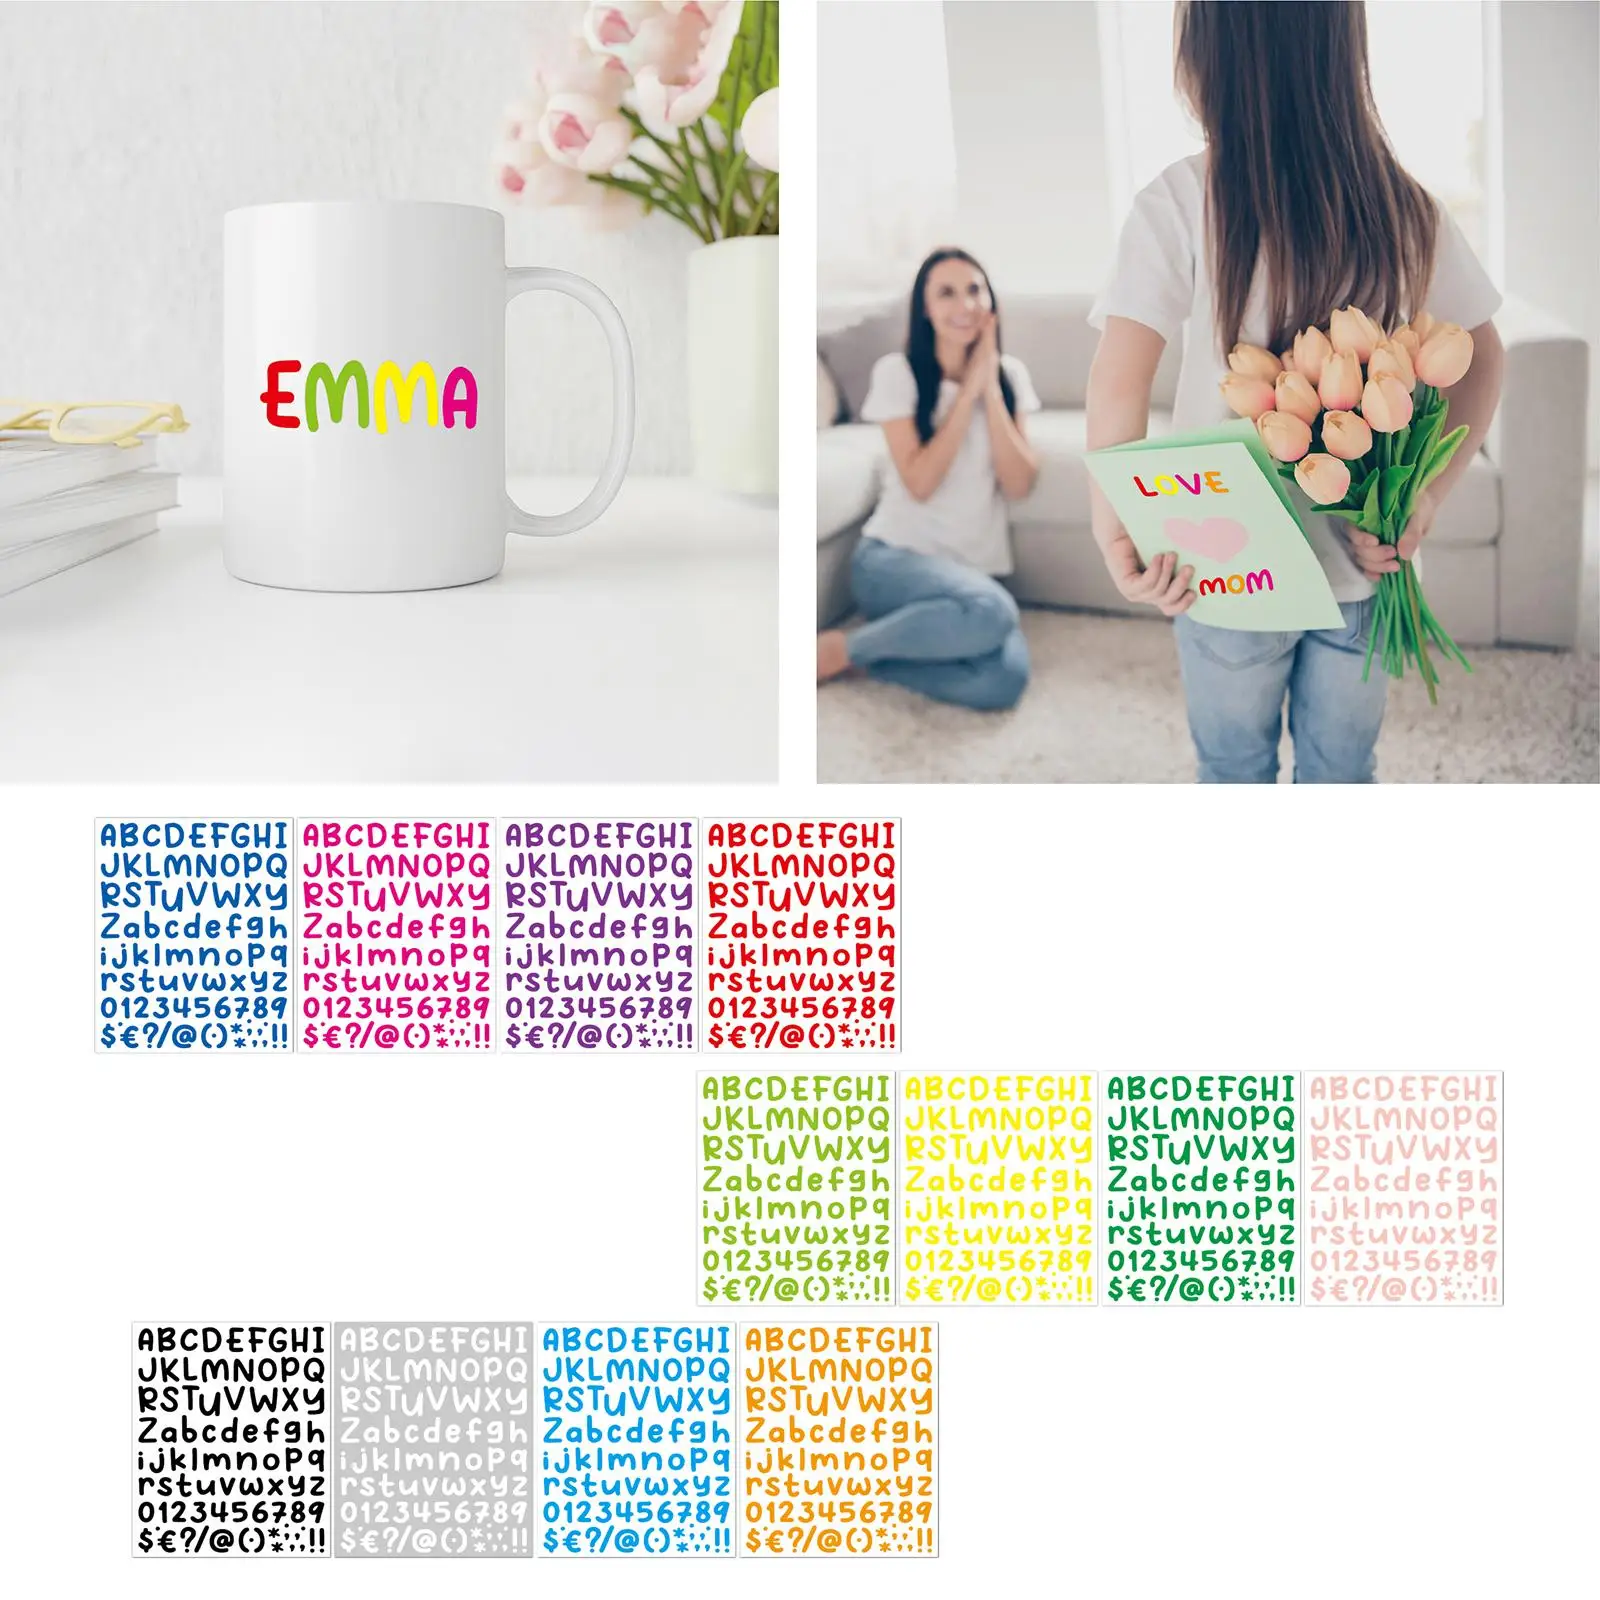 12Pcs Alphabet Letter Stickers 1 inch Self Adhesive Colorful Vinyl Letter Stickers for Gift Wrapping Mailbox Business